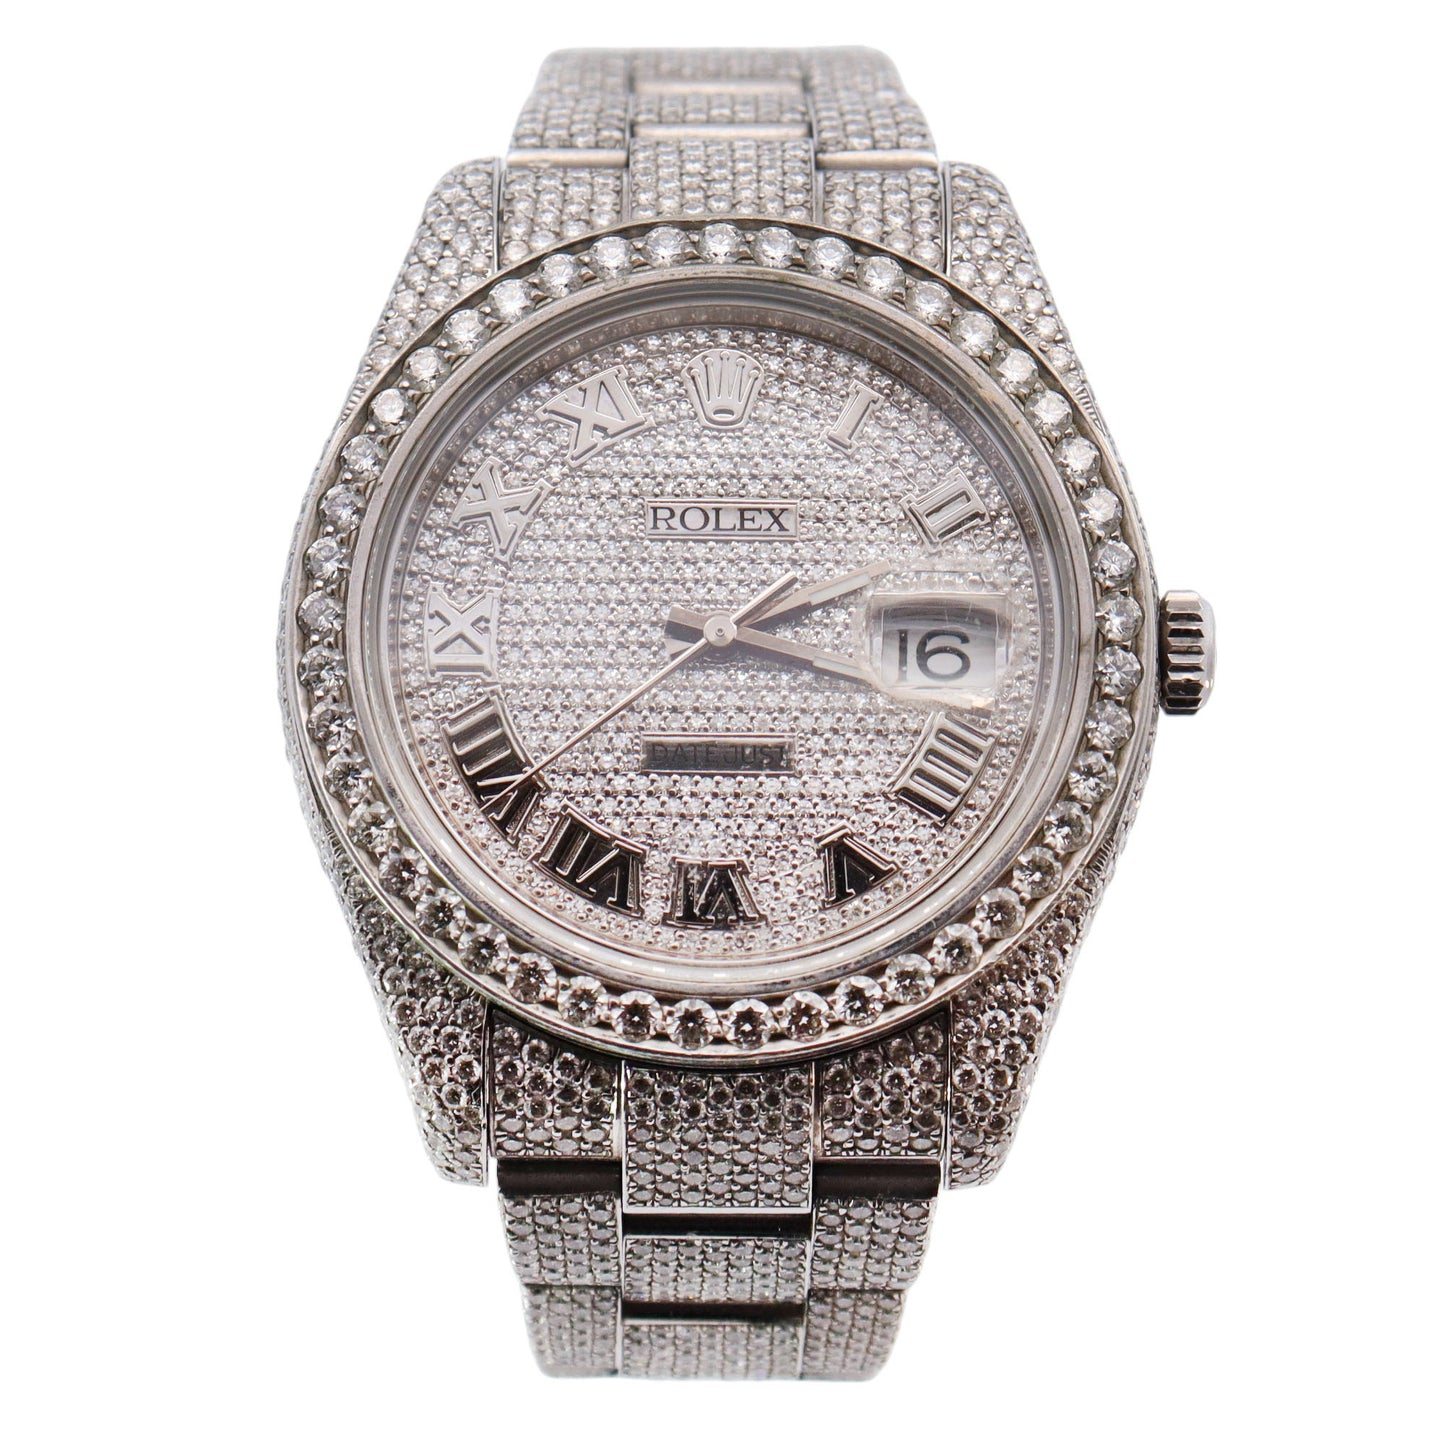 Rolex Datejust ICED OUT Stainless Steel 41mm Custom Pave Roman Dial Watch Reference# 116300